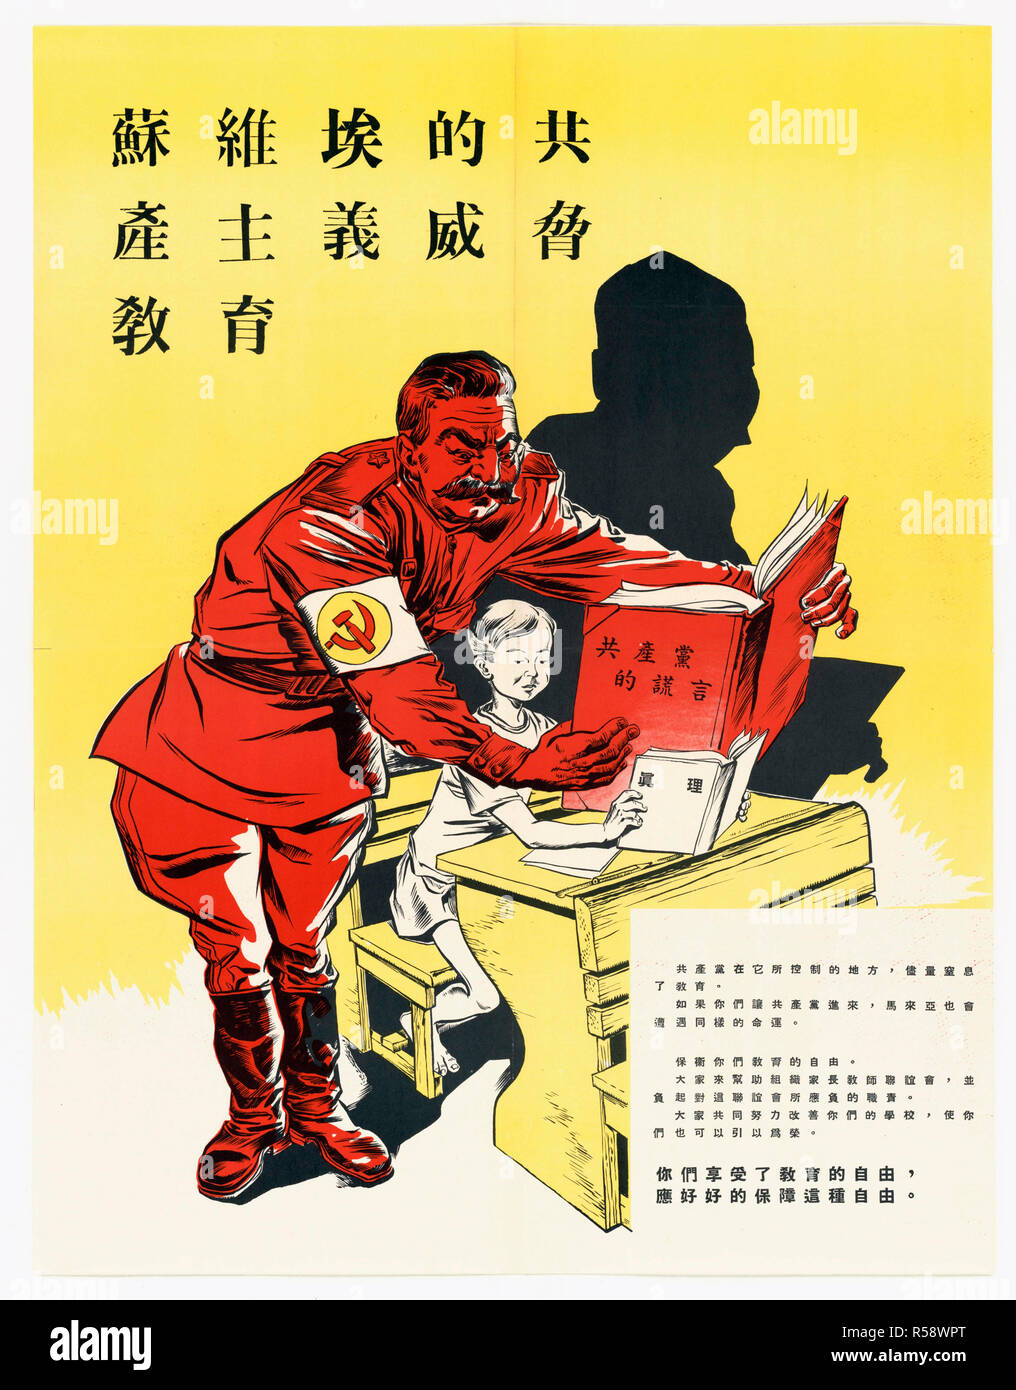 6/20/1952 - U.S. Propaganda Posters in 1950s Asia - Soviet Communism Threatens Education poster (written in Chinese) Stock Photo